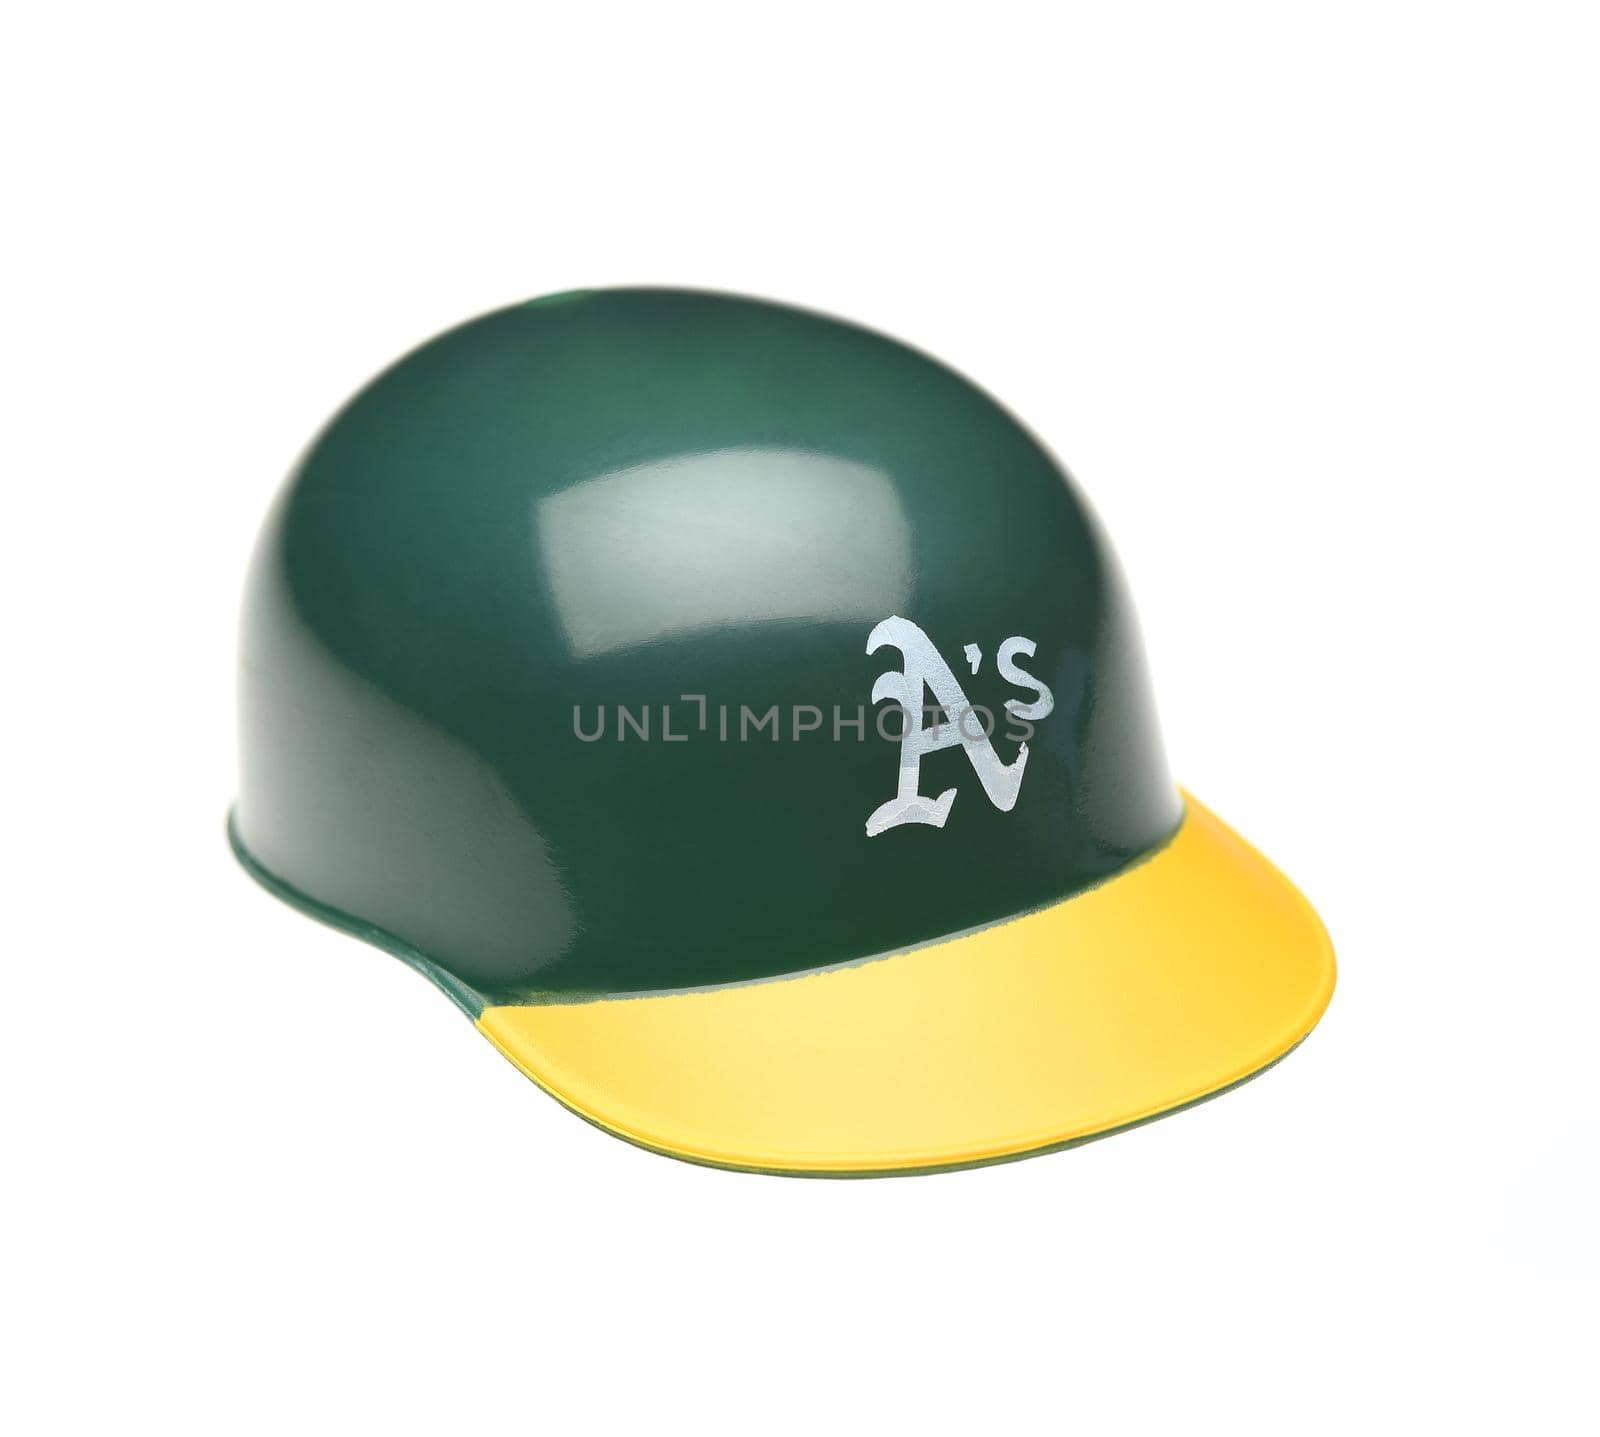 Closeup of a mini collectable batters helmet for the Oakland A's by sCukrov